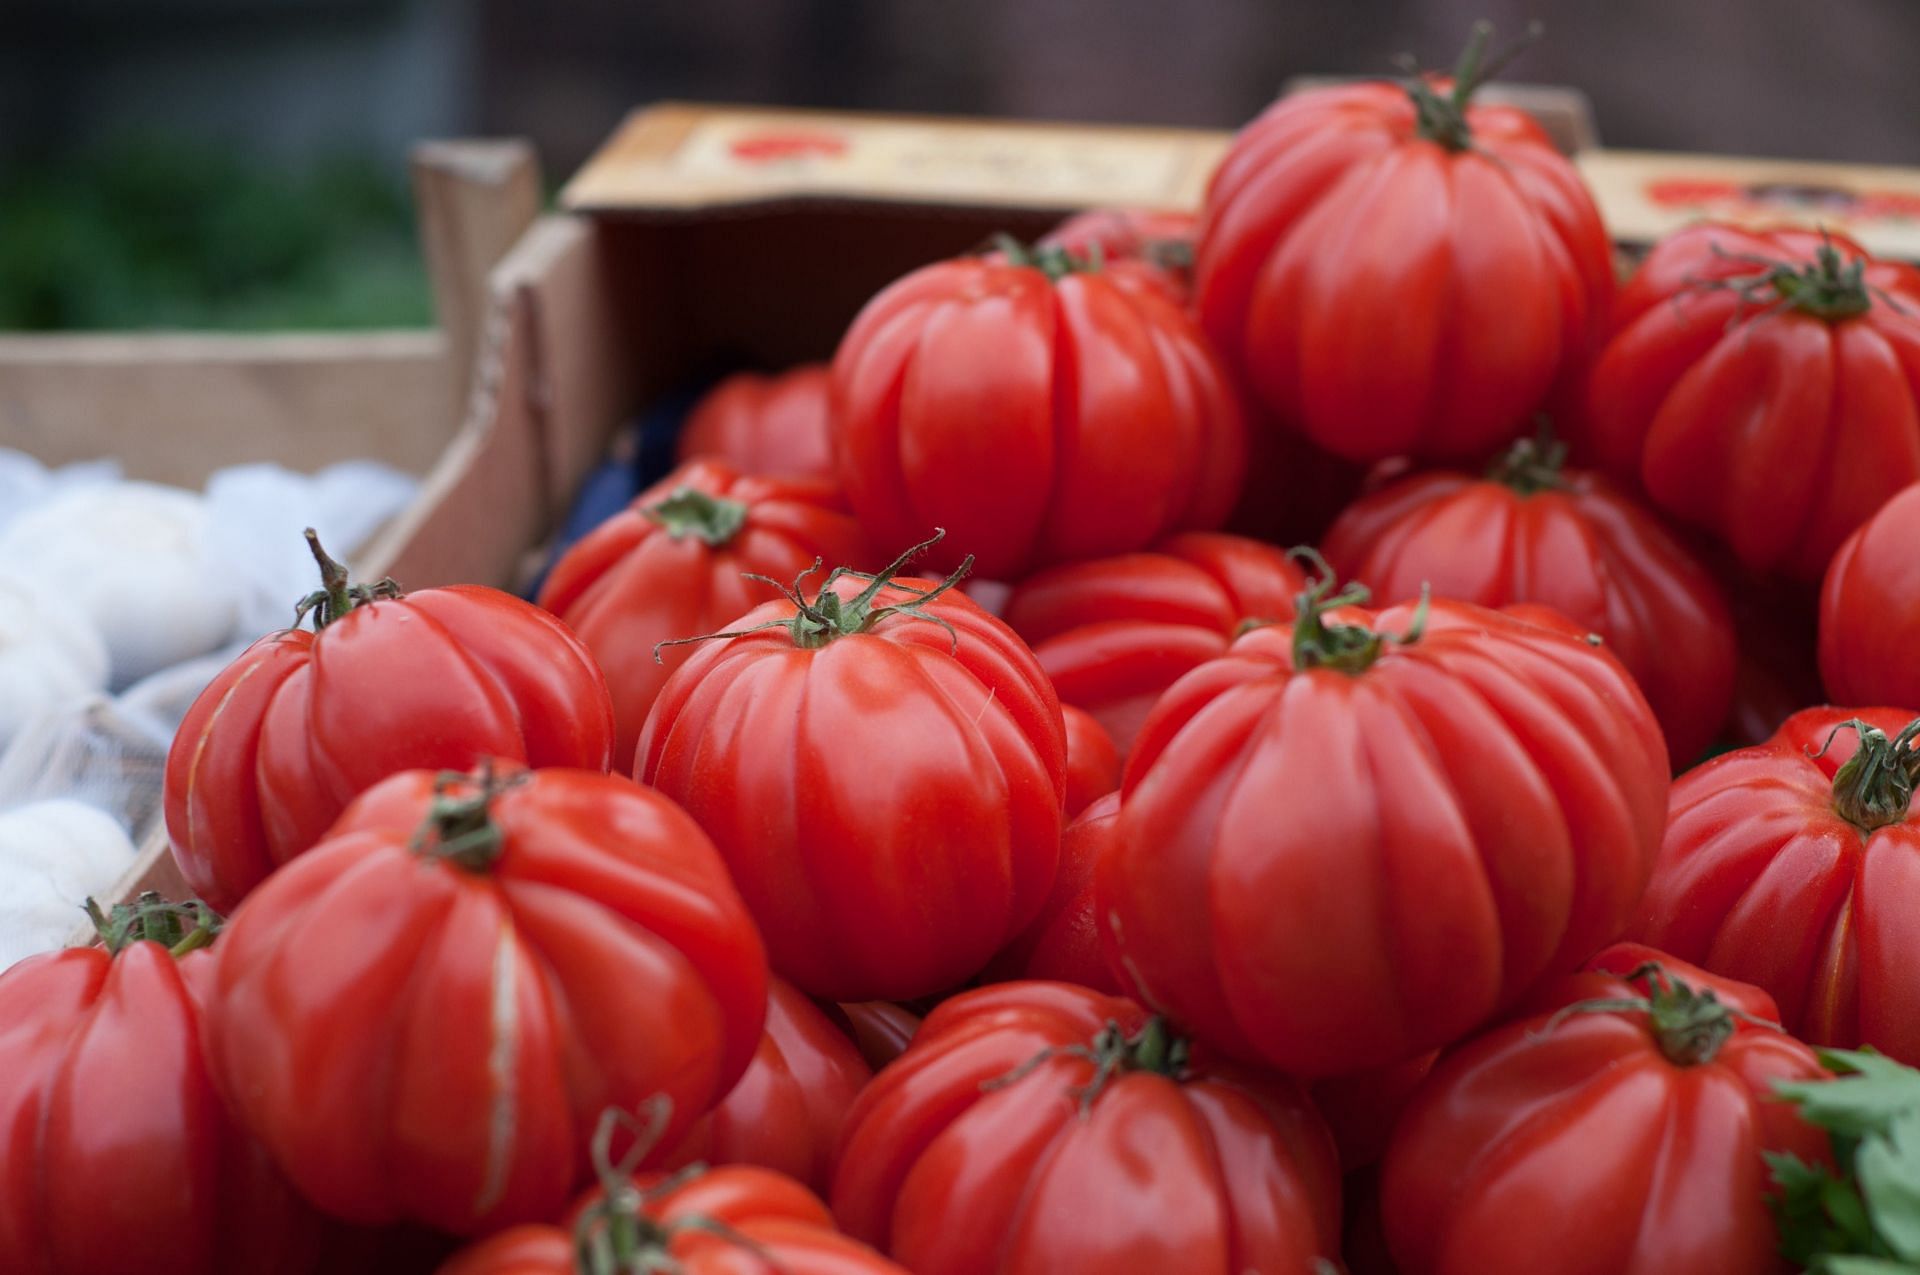 Importance of understanding health benefits of heirloom tomatoes (image sourced via Pexels / Photo by mali maeder)